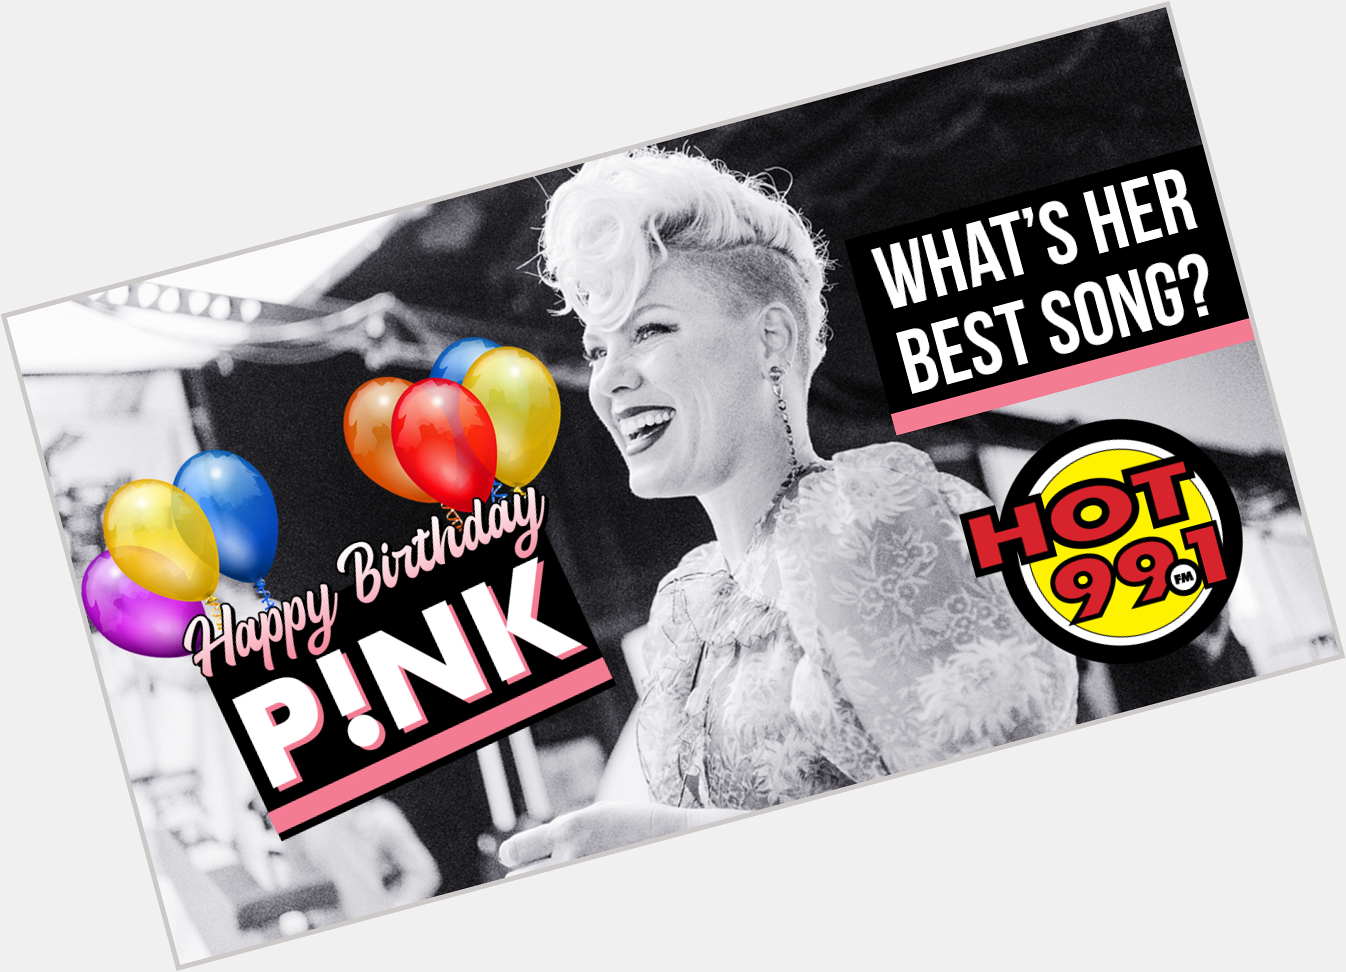 Happy 42nd Bday P!nk!  Best song ?  Raise Your Glass! What about you?  